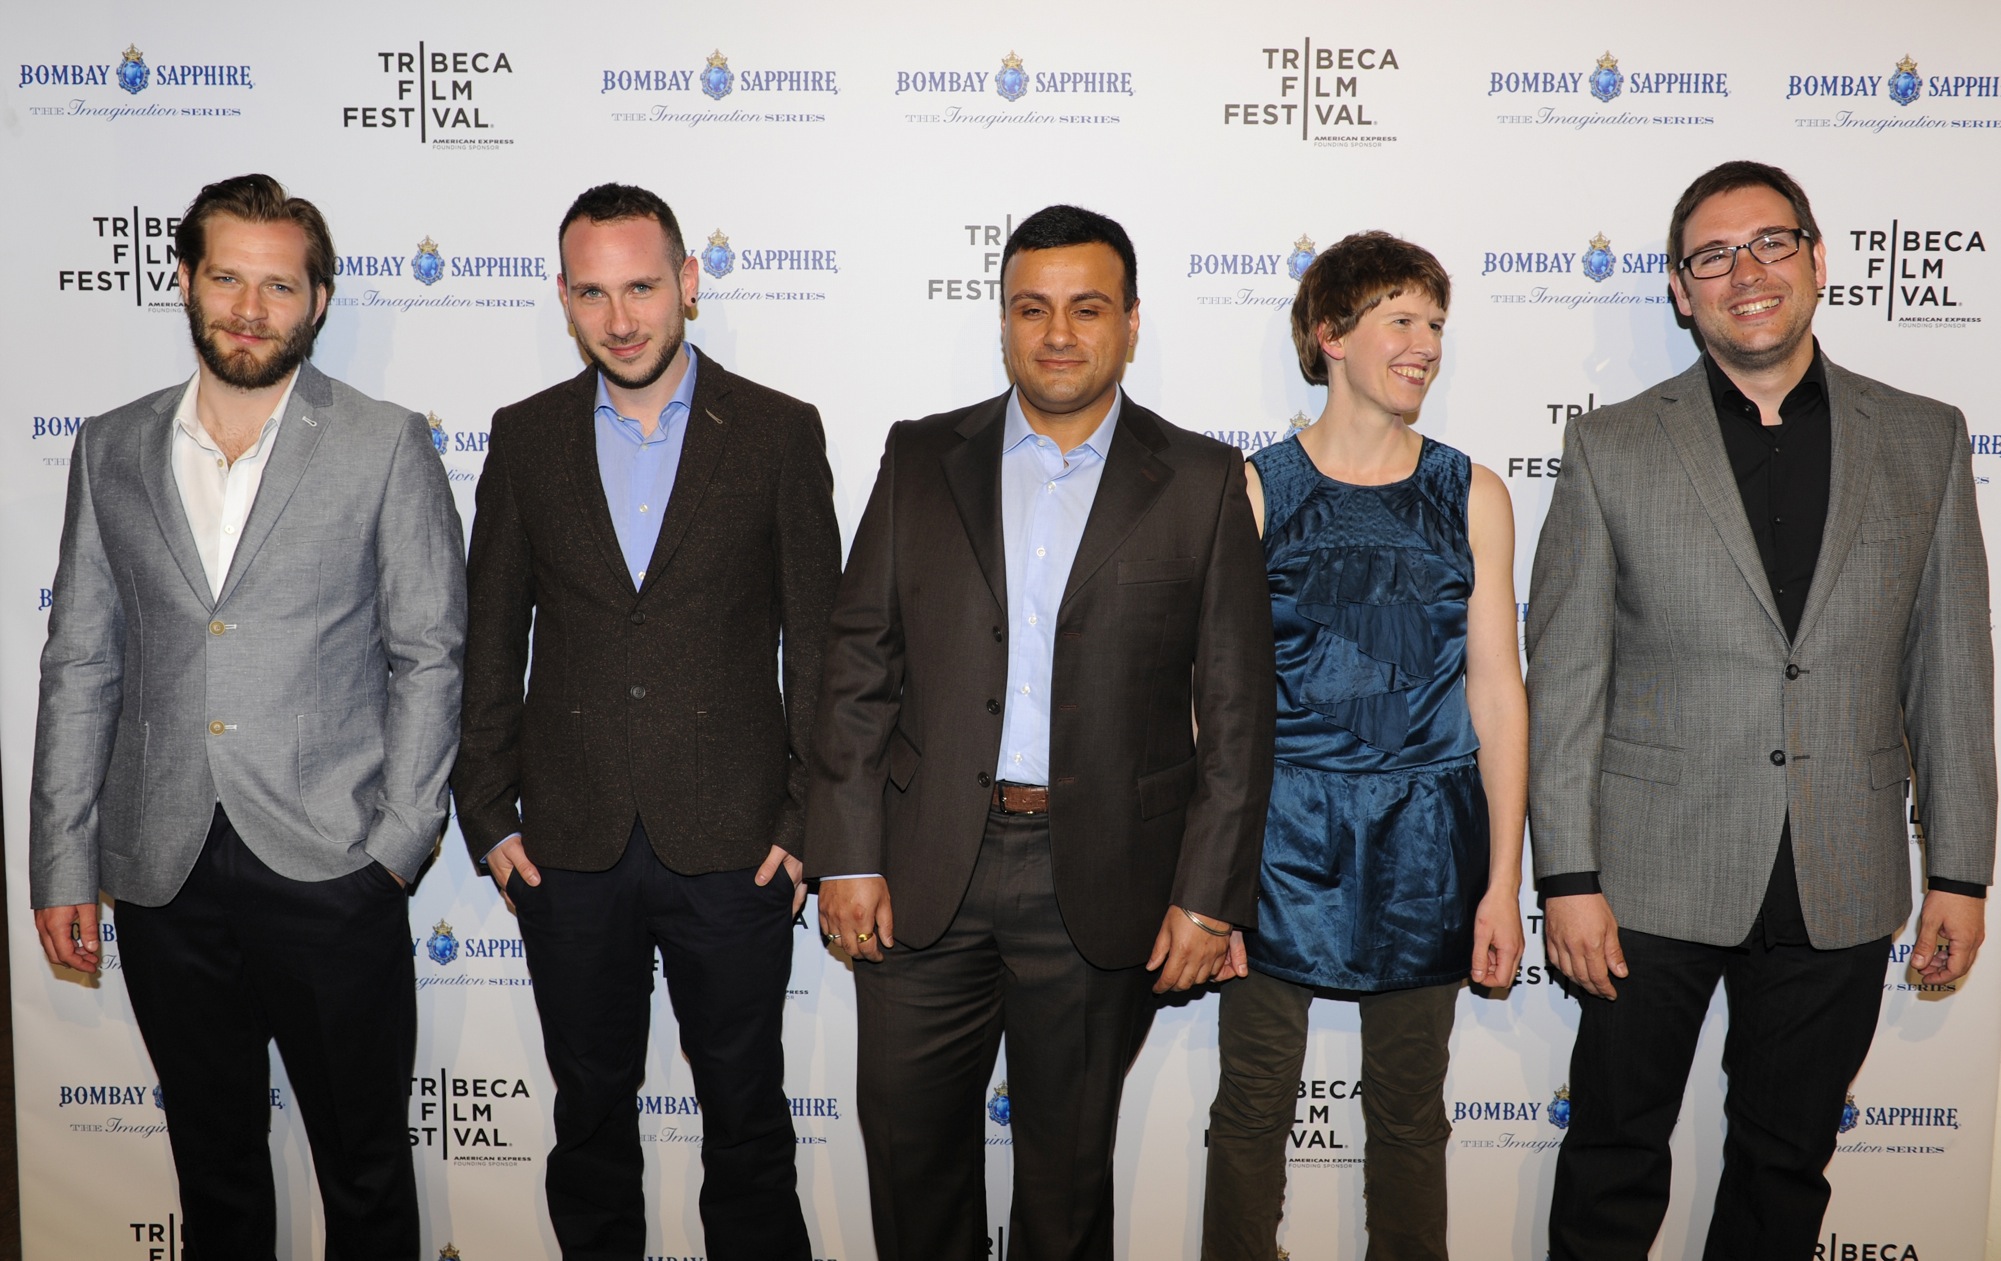 Bombay Sapphire Imagination series winner Shekhar Bassi with four other winners on the red carpet at Tribeca Film Festival 2013.